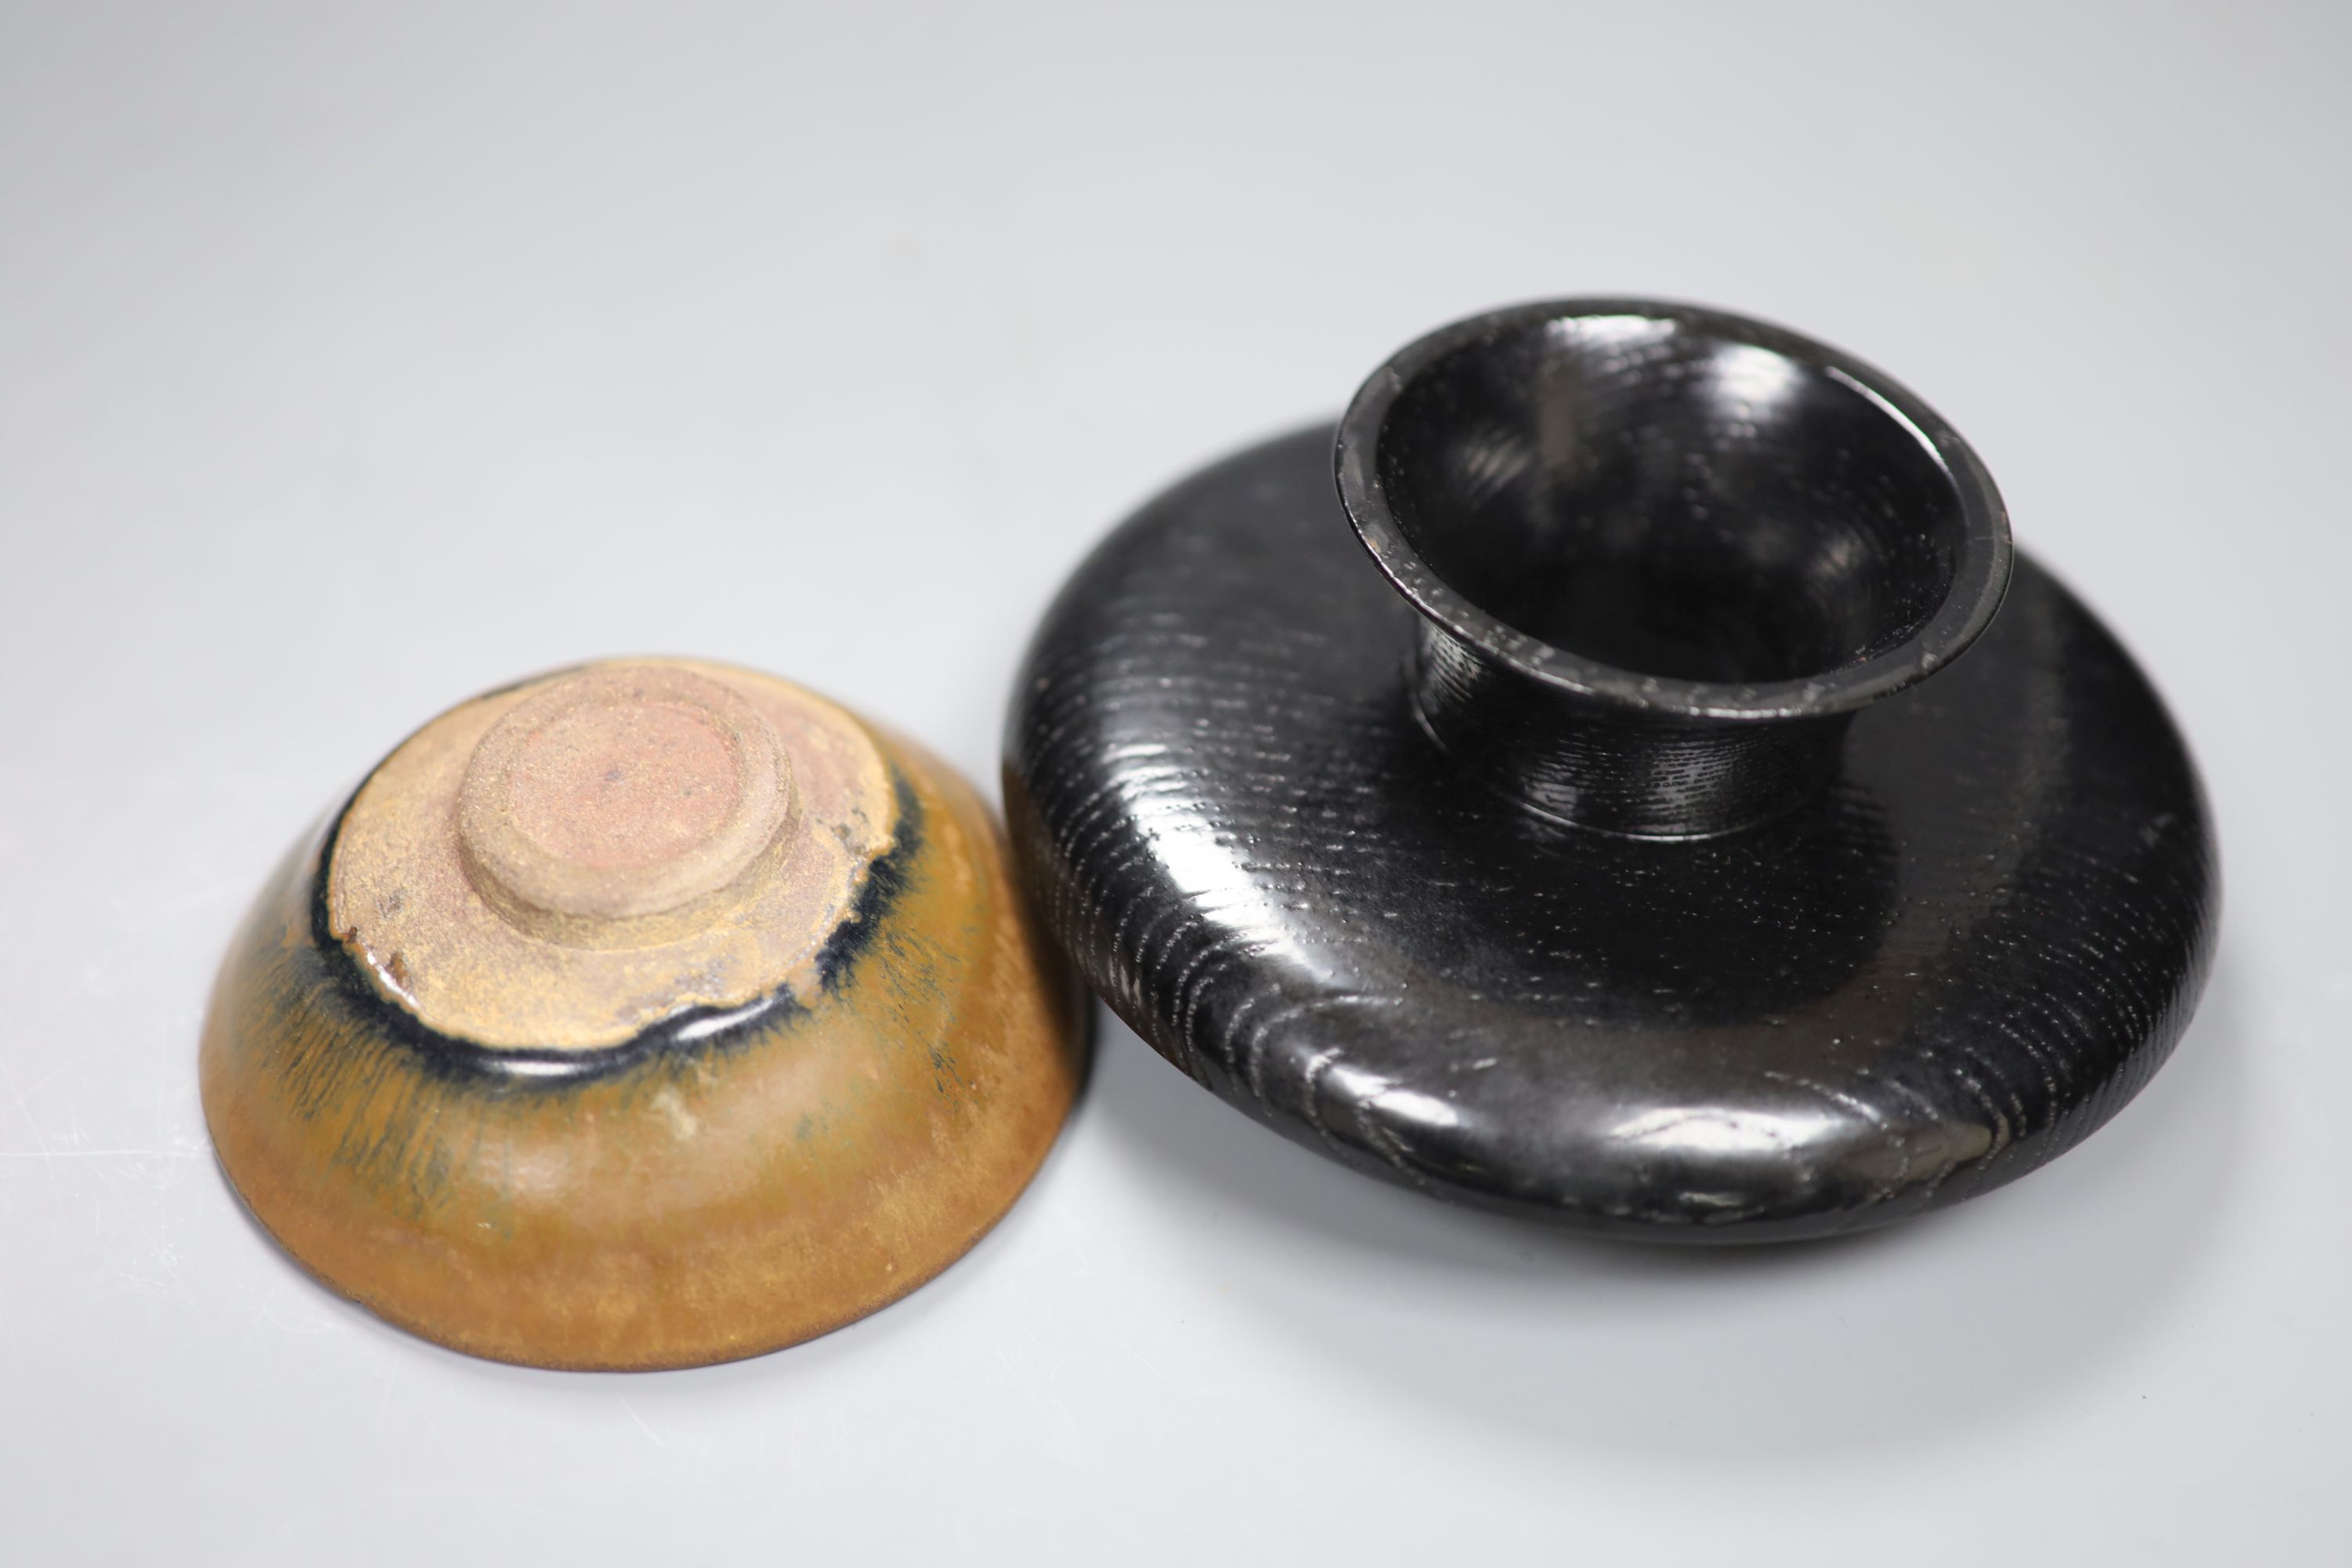 A Chinese Tenmoku tea bowl, diameter 9.5cm, and a lacquer stand